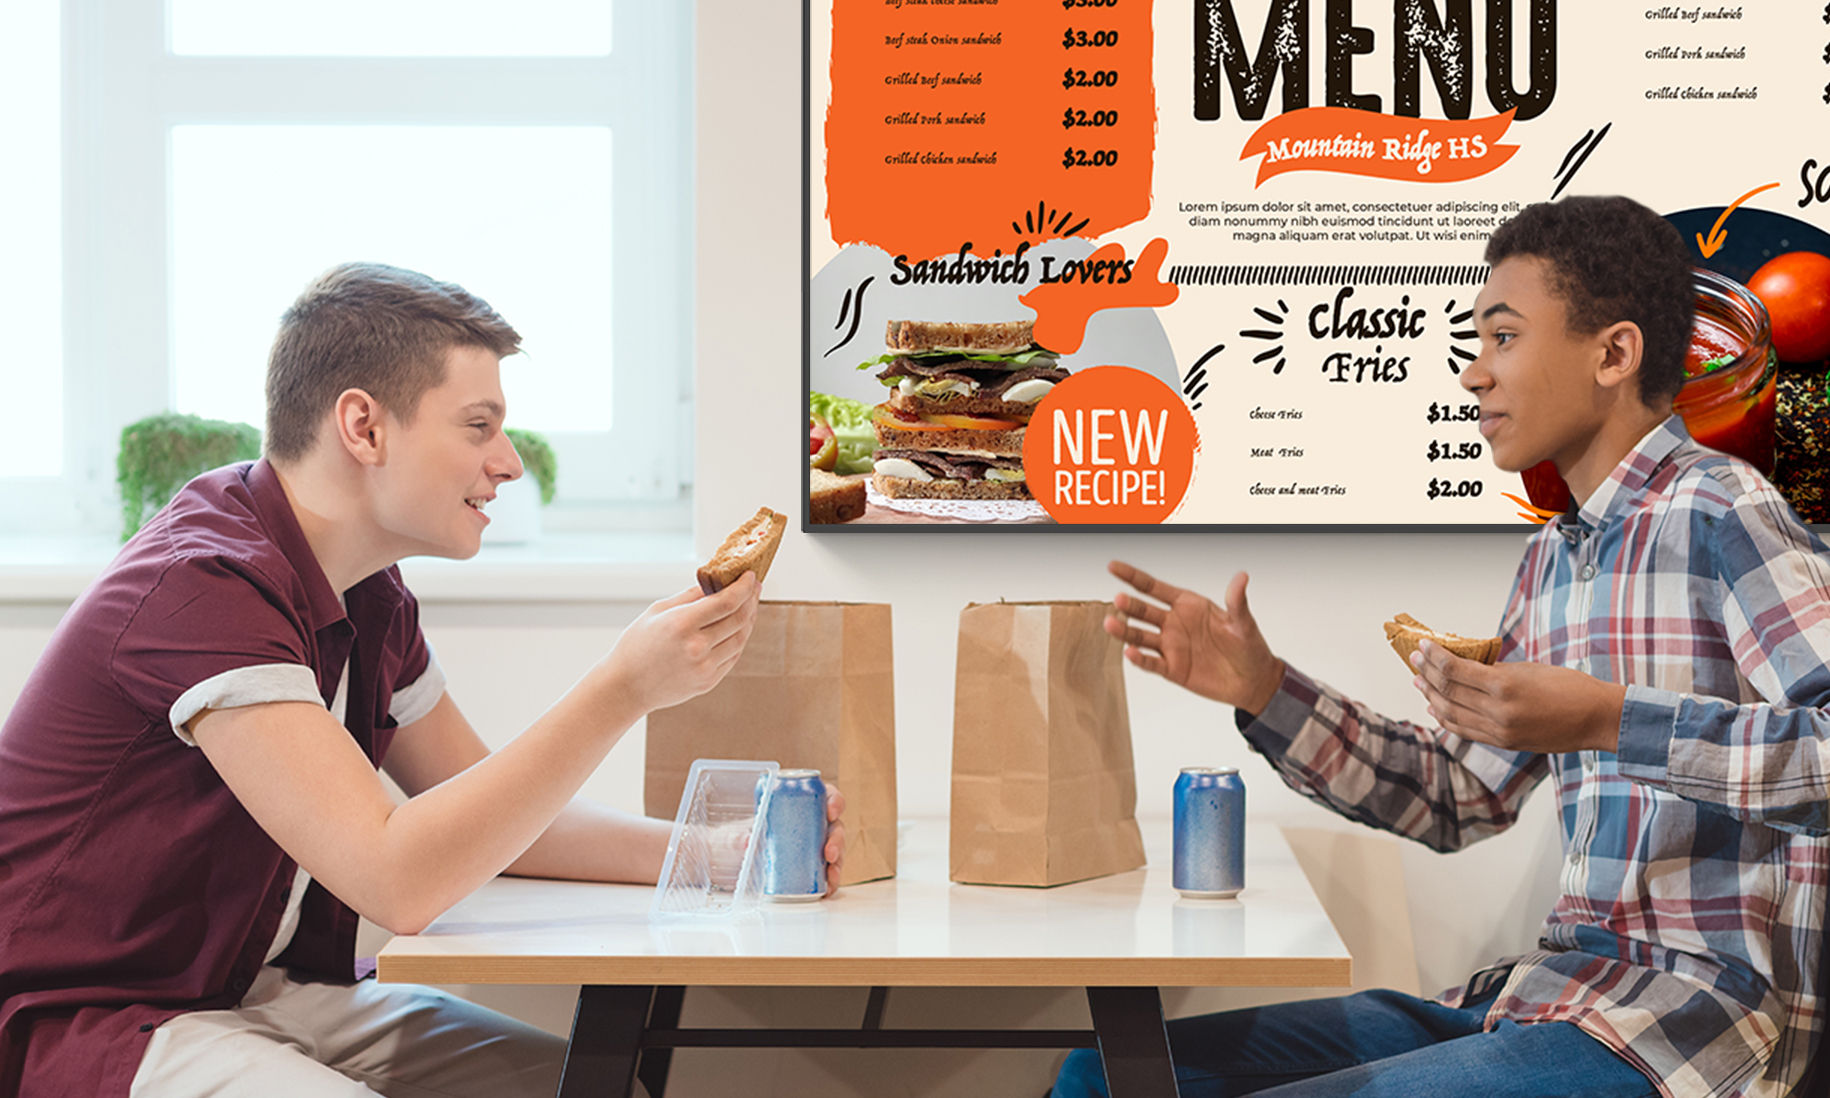 Two students having lunch together in cafeteria in front of digital signage display showing menu